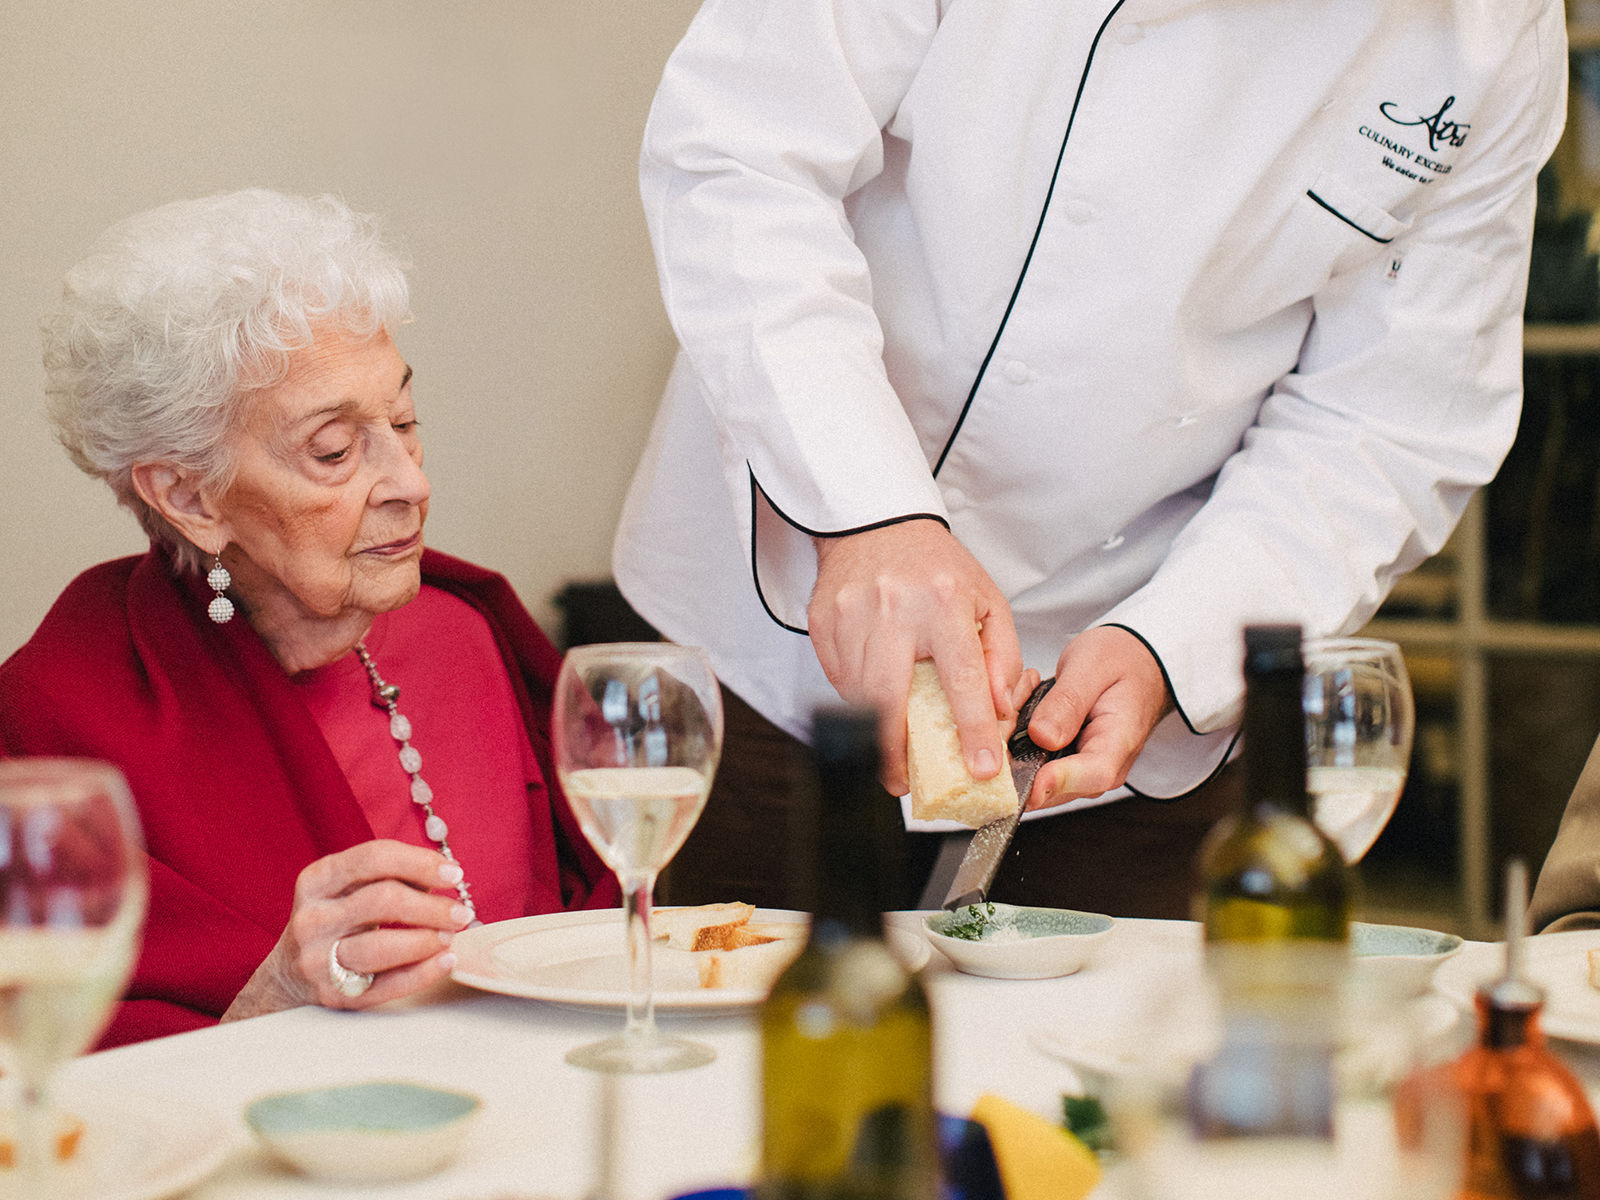 Chef grating Parmesan cheese onto the salad of a discerning older woman wearing red